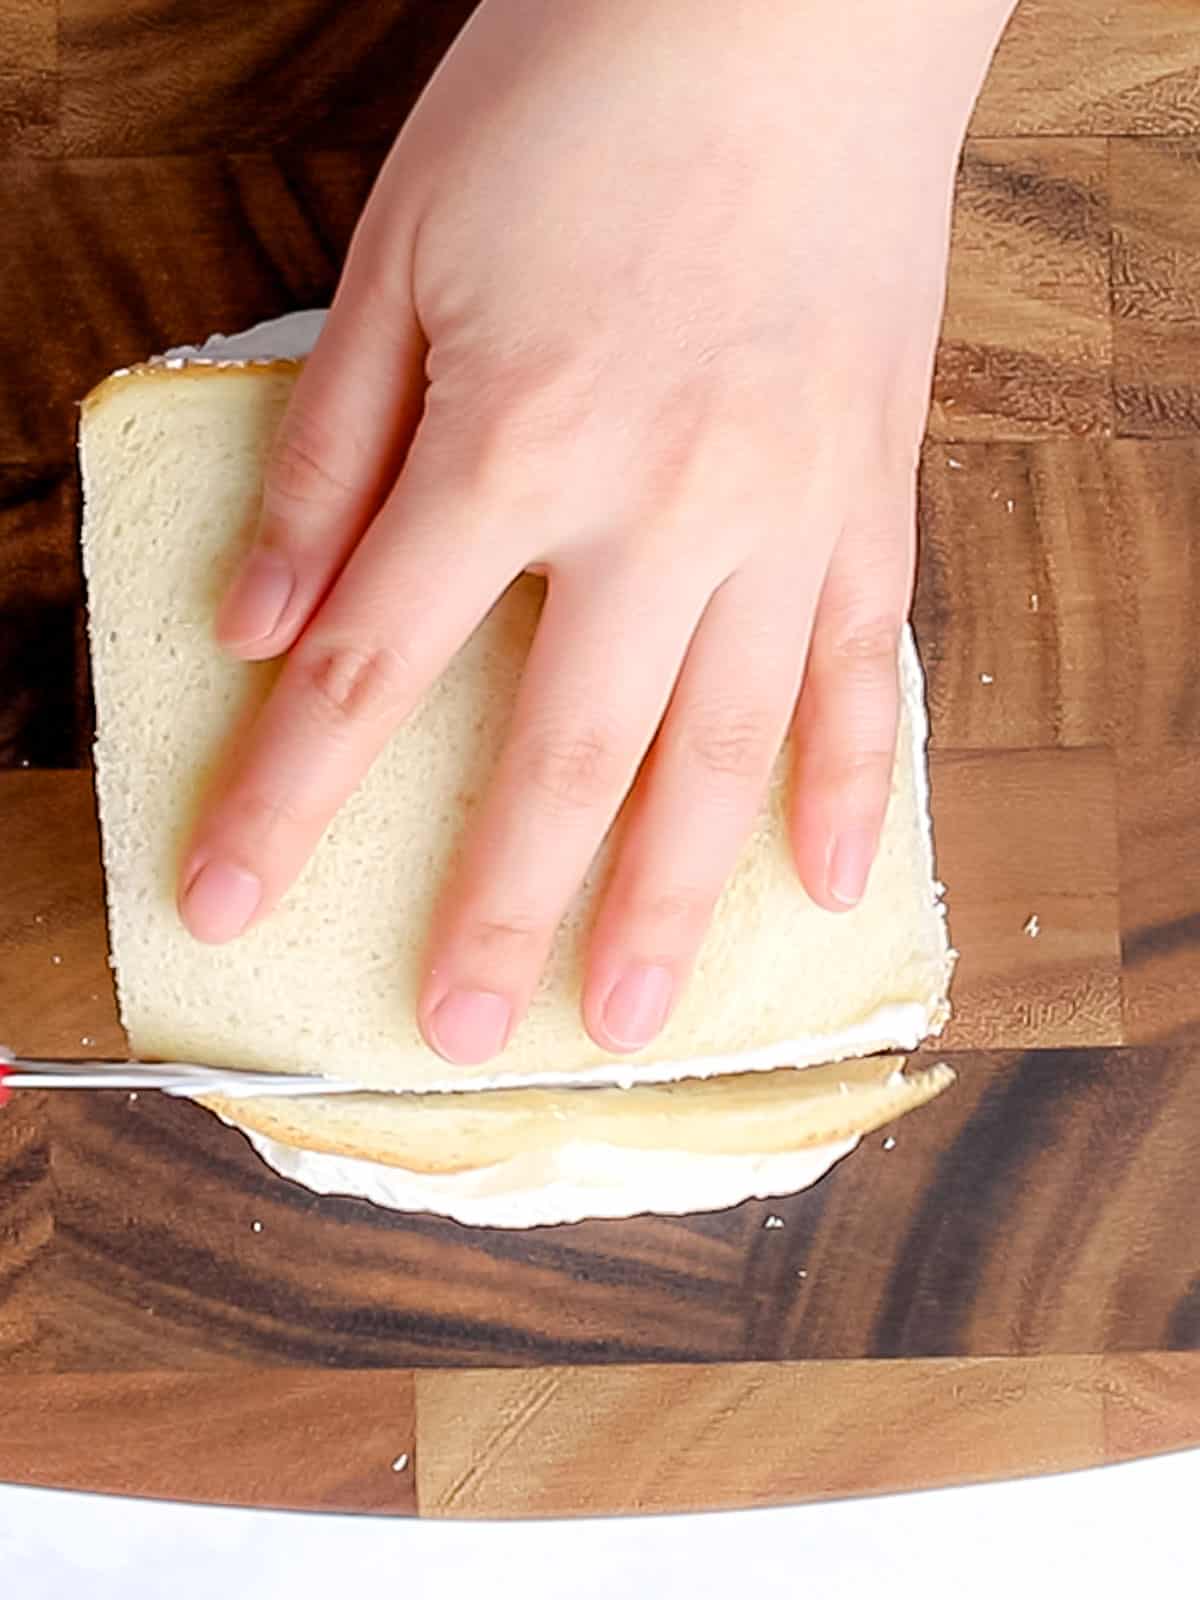 Cutting the crust off of white sliced bread laid on a wooden cutting board.